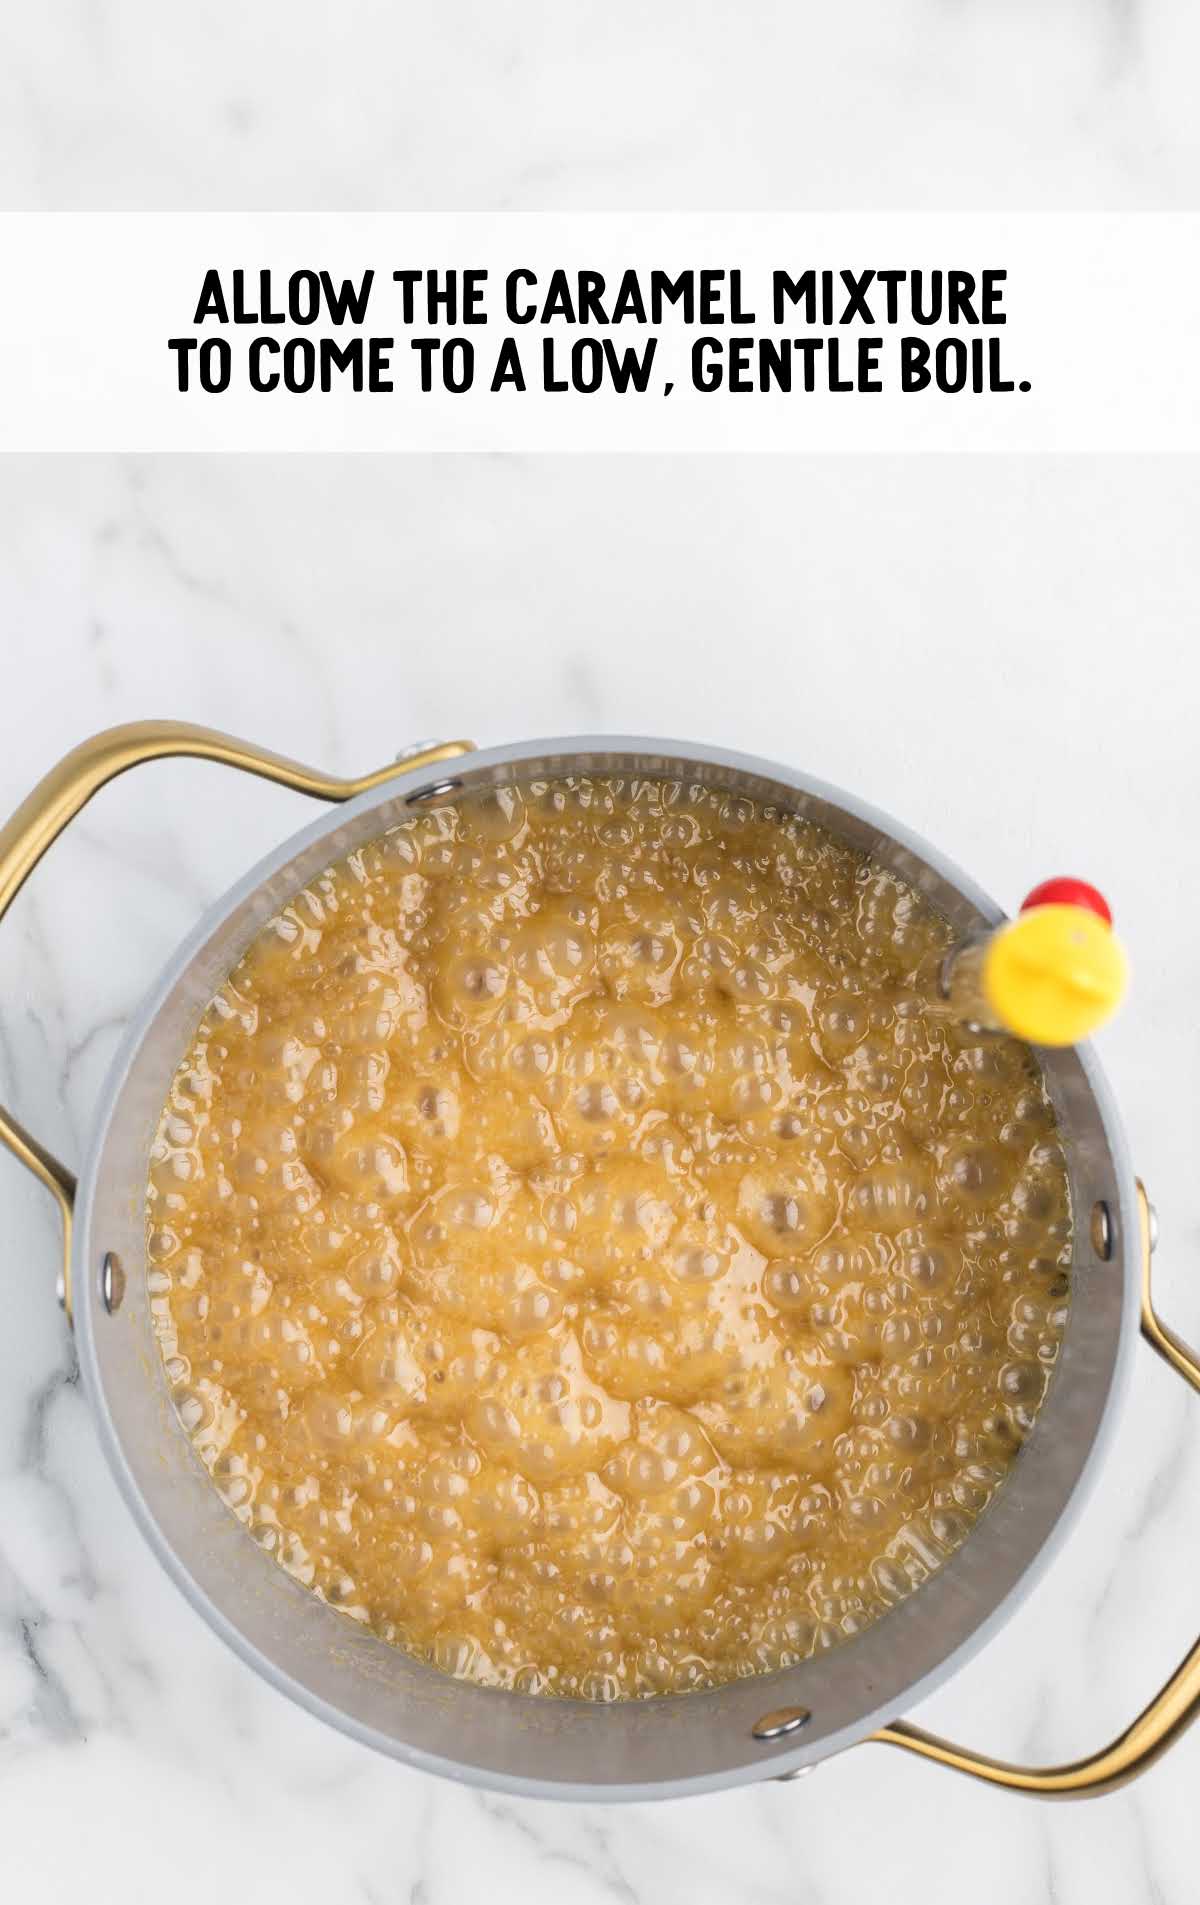 caramel mixture allowed to come to a low, gentle boil